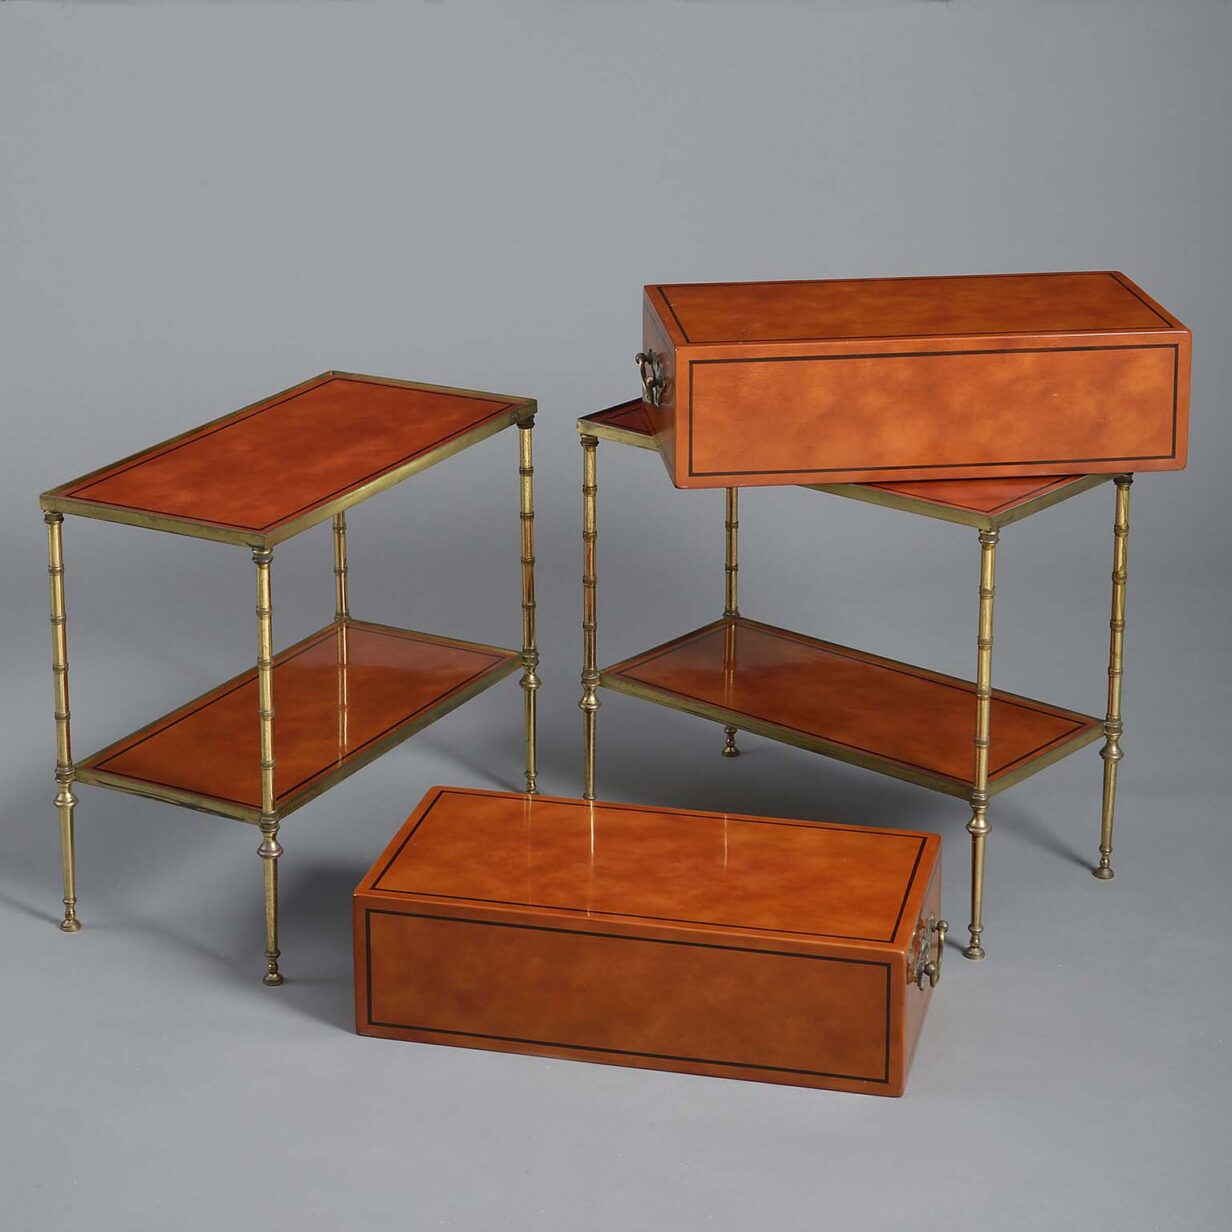 Pair of 20th century metamorphic lacquer & brass end tables